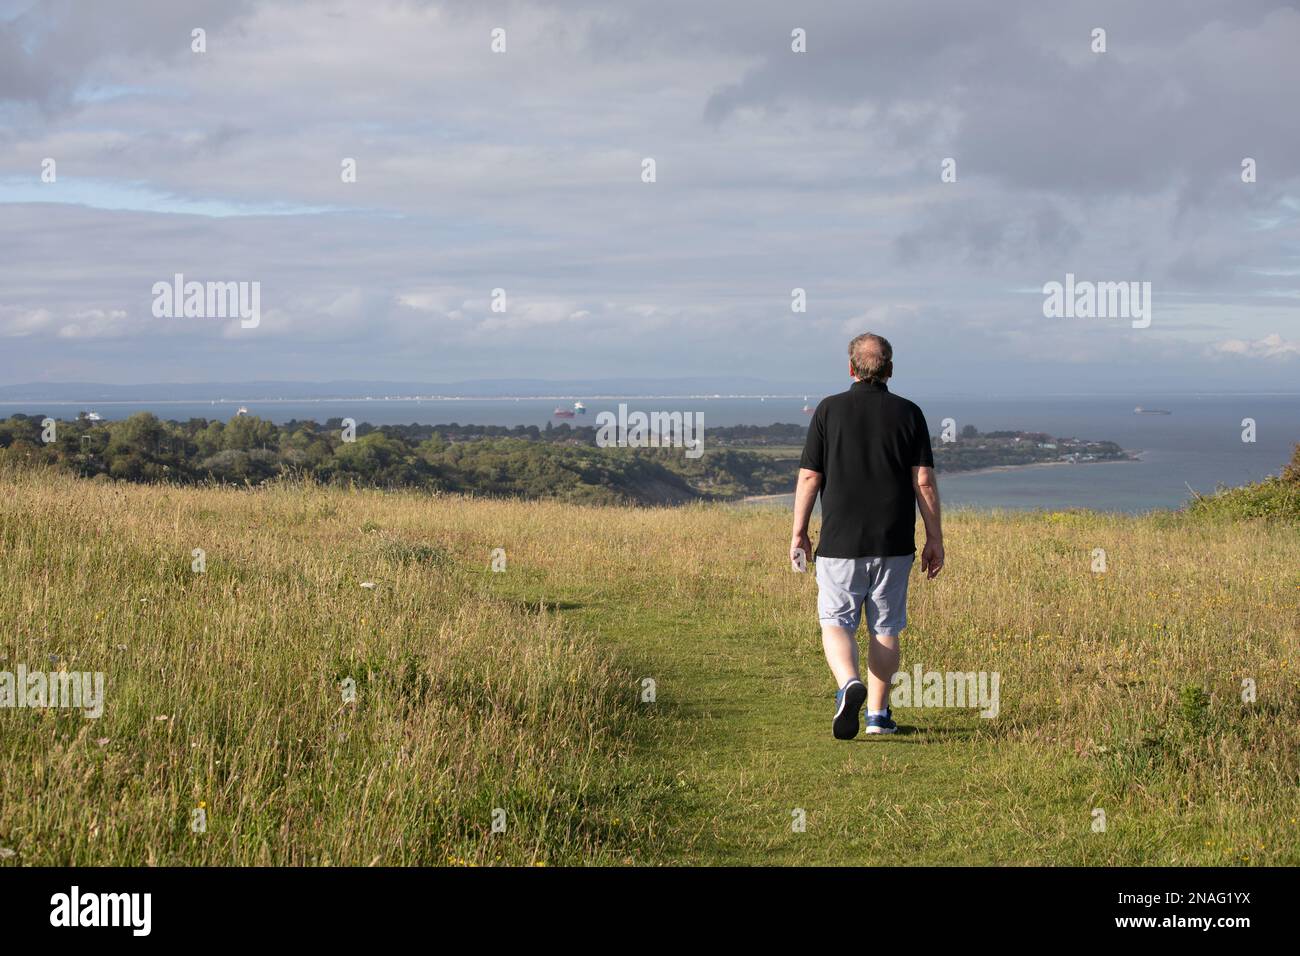 A man walks along the top of a hill on a grass path. He looks out over the sea and land in the distance. It looks relaxing and inviting for a hike. Stock Photo